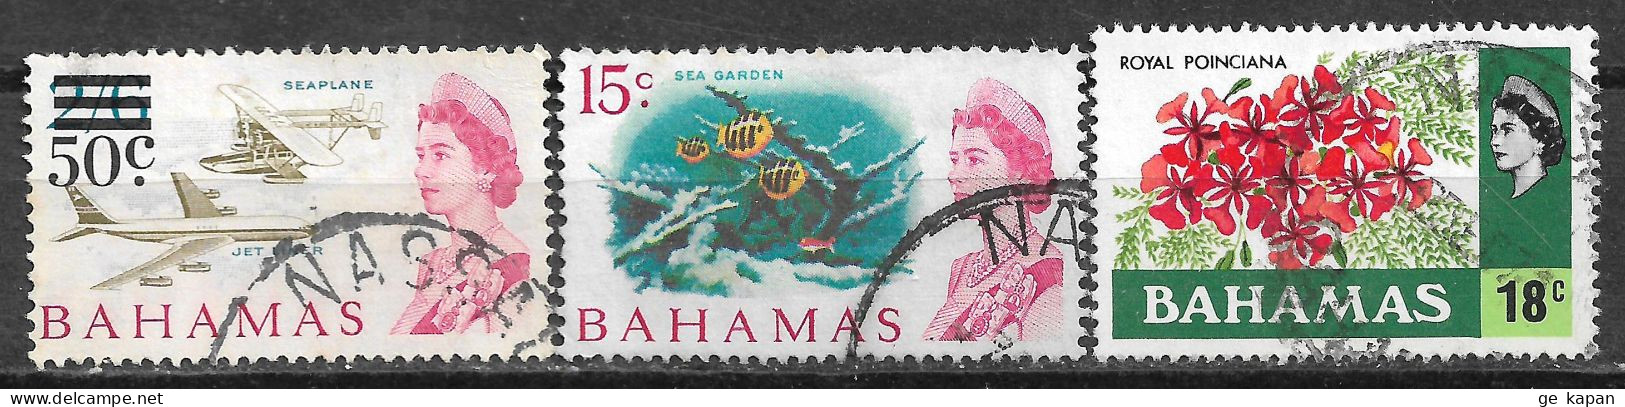 1966-1971 BAHAMAS SET OF 3 USED STAMPS (Michel # 246,266,335) CV €3.90 - 1963-1973 Ministerial Government